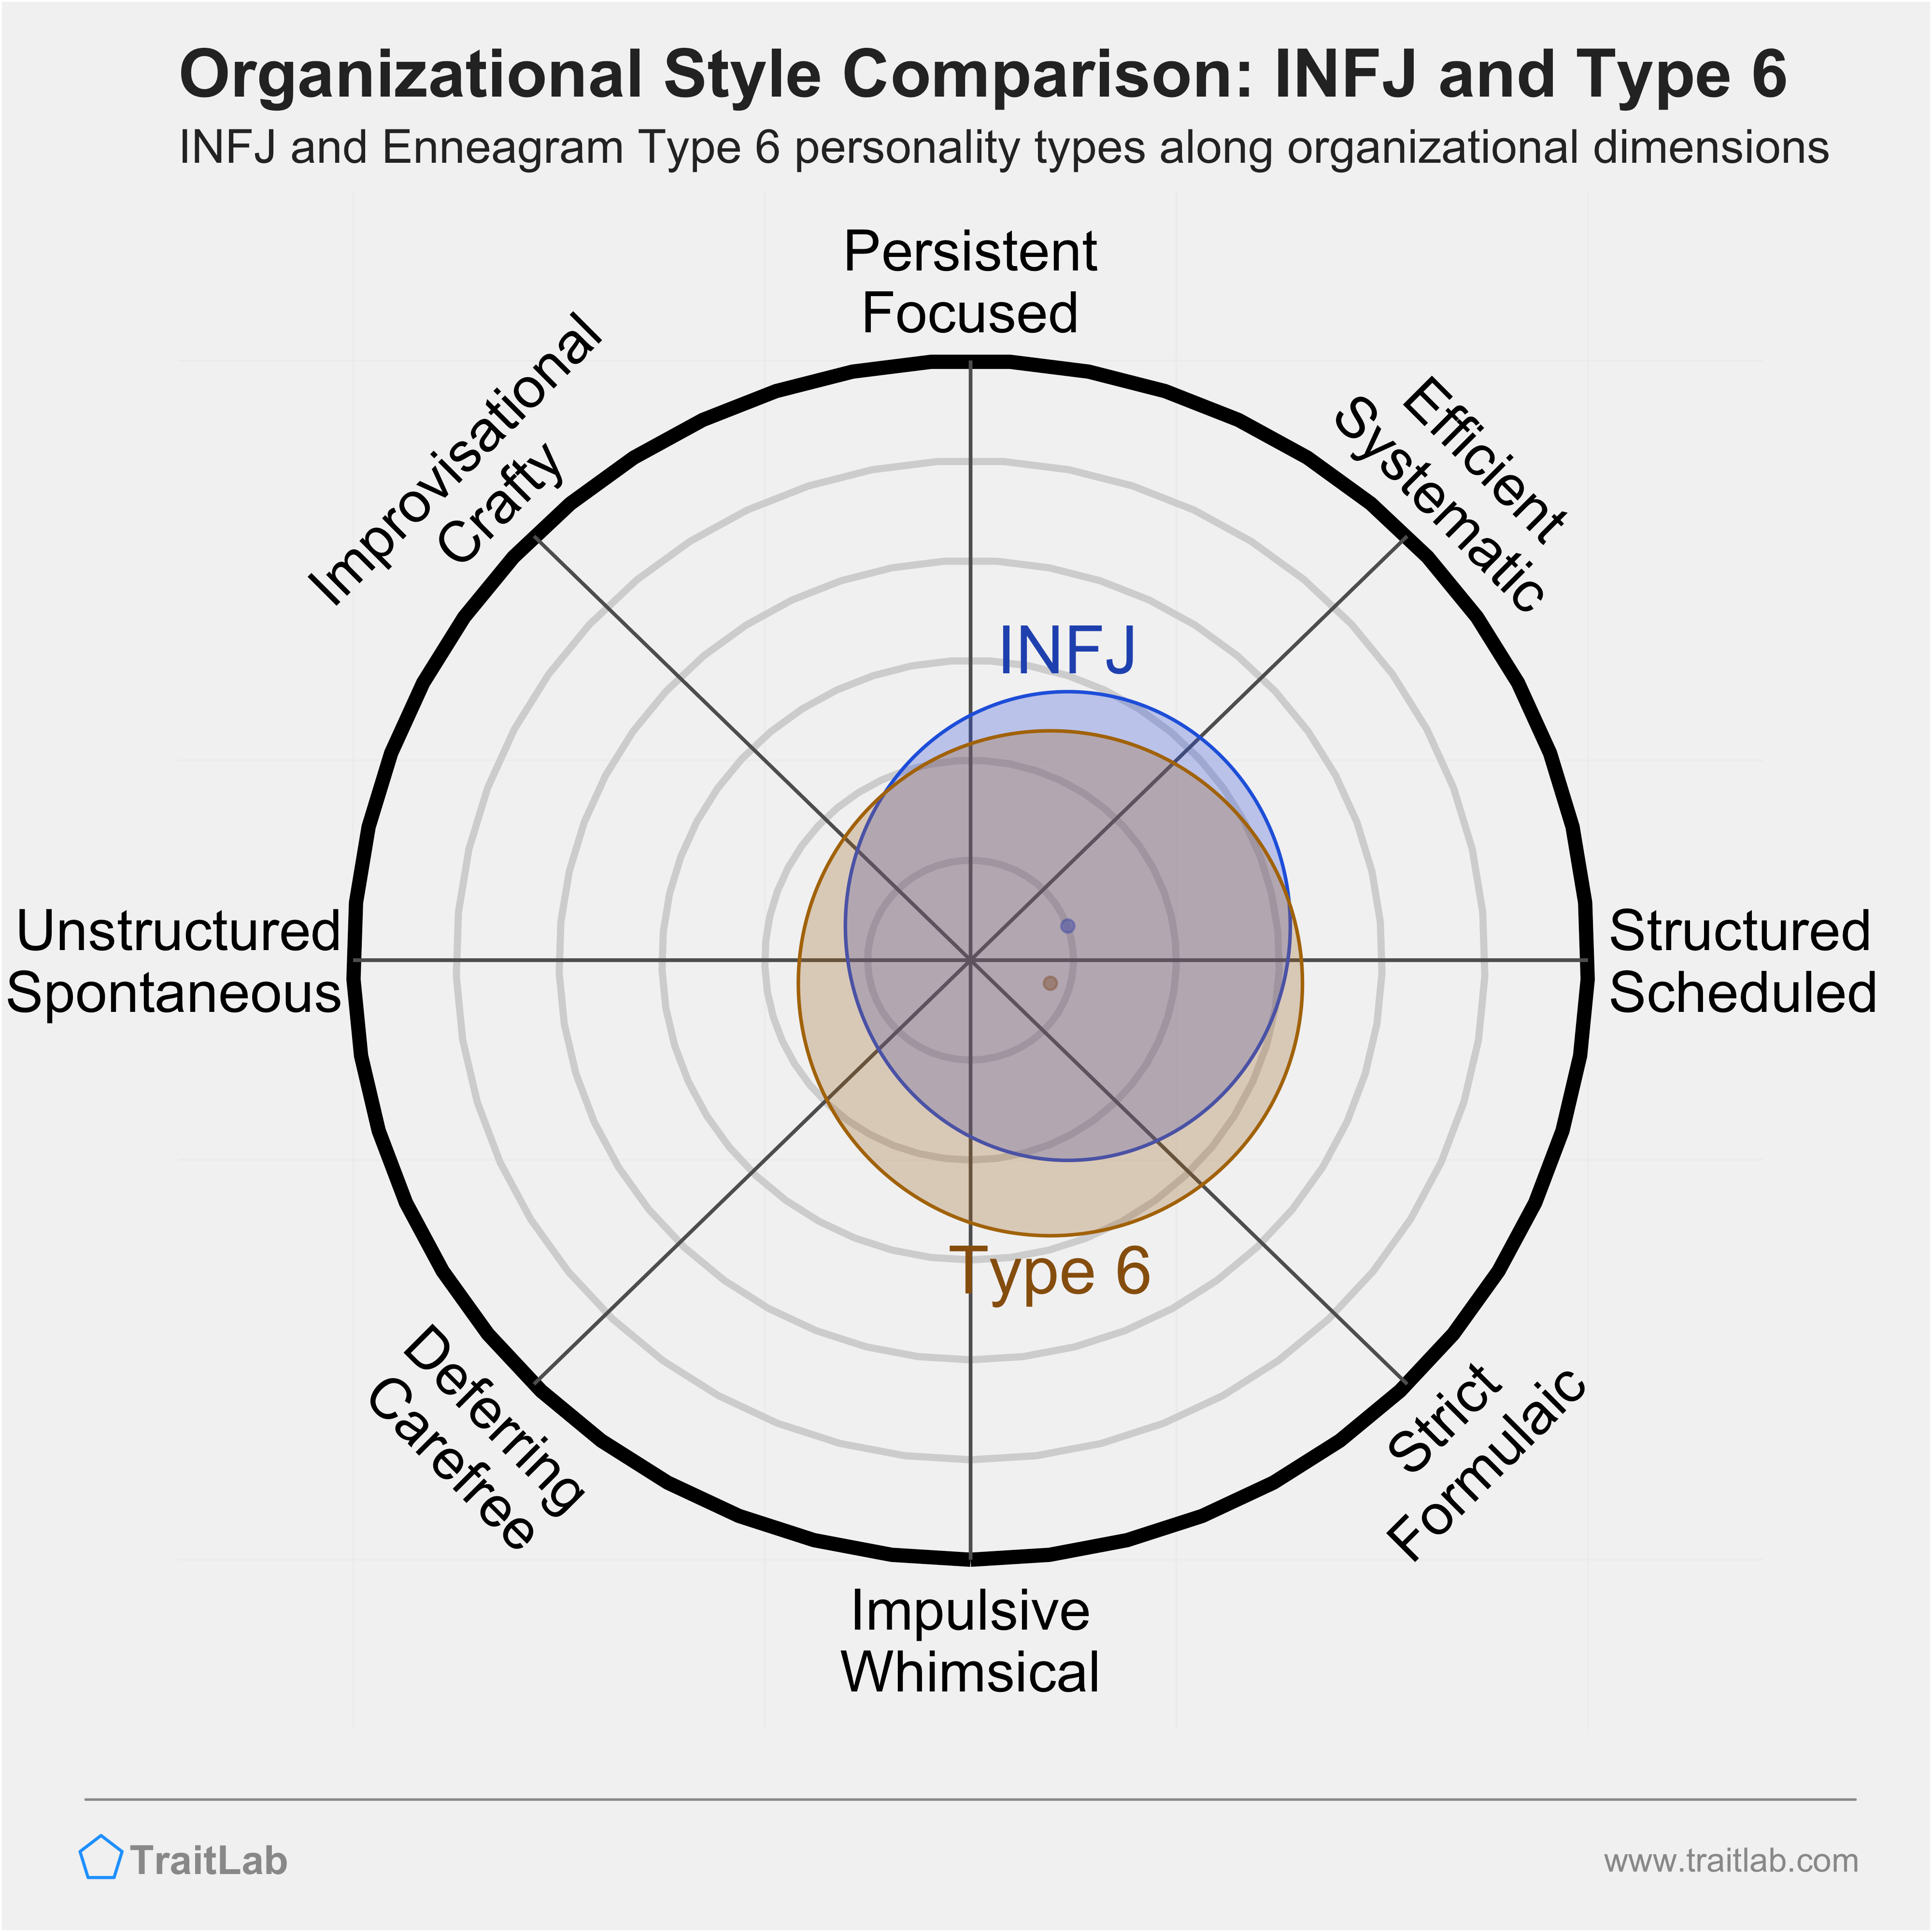 INFJ and Type 6 comparison across organizational dimensions